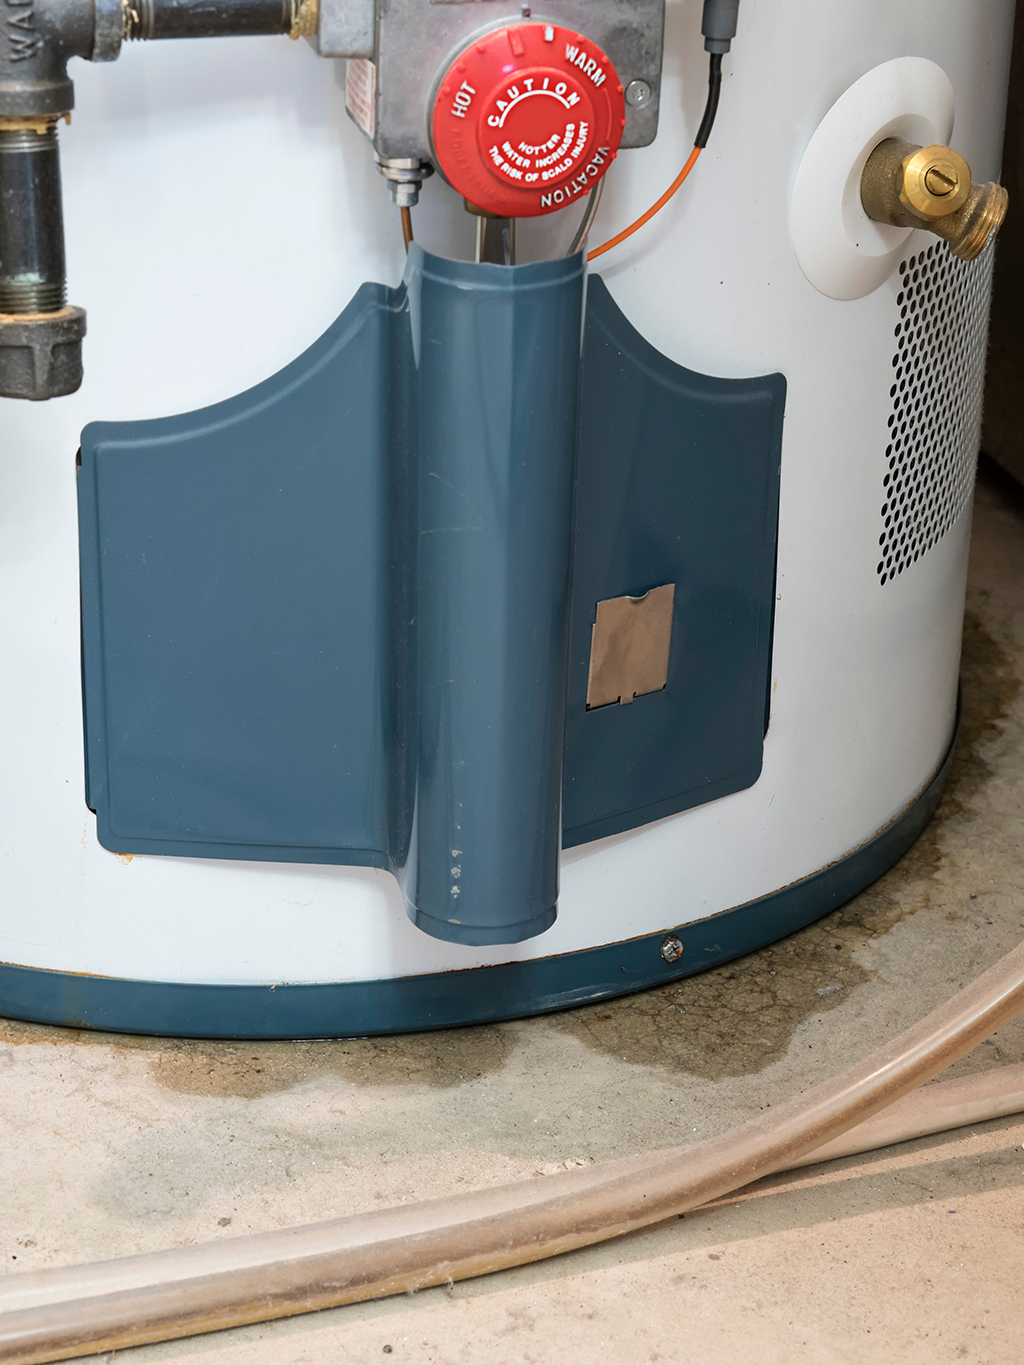 water-heater-repair-how-to-tell-if-your-water-heater-is-about-to-fail